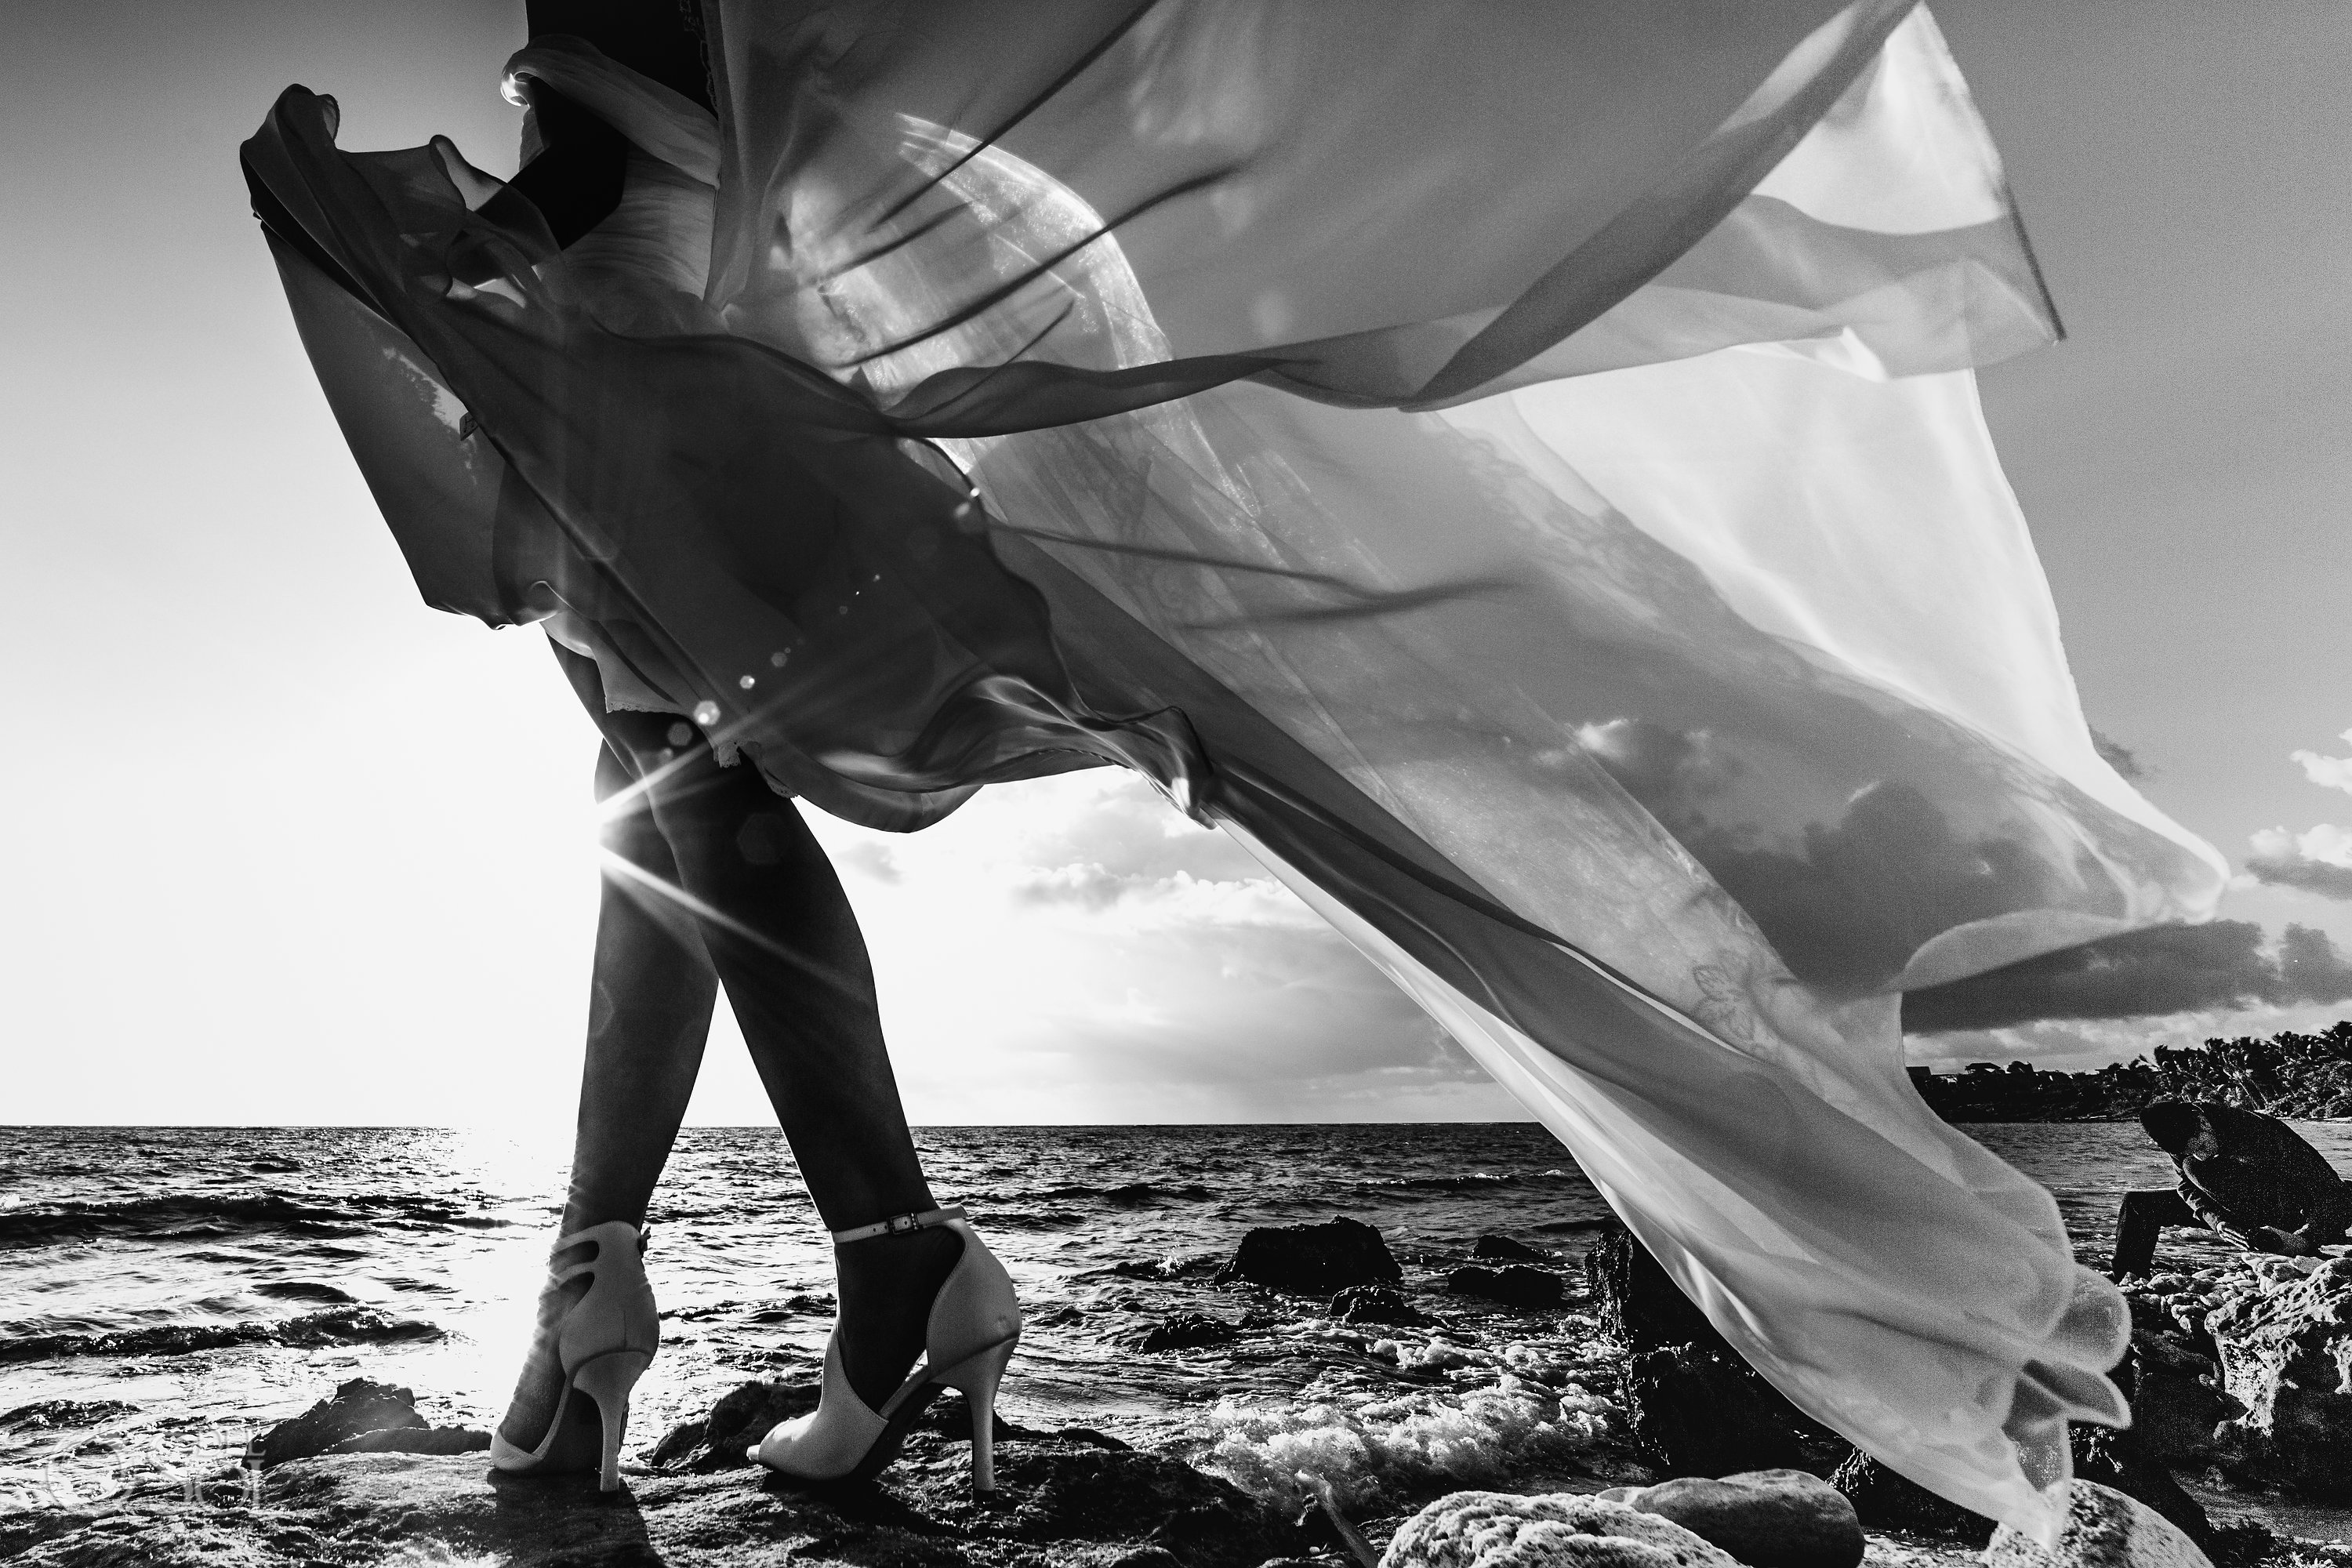 Sexy bridal long legs Sunlight merging Passioned Windy Black White Wedding Details Vintage Bridal Shoes Akumal Bay Elopement